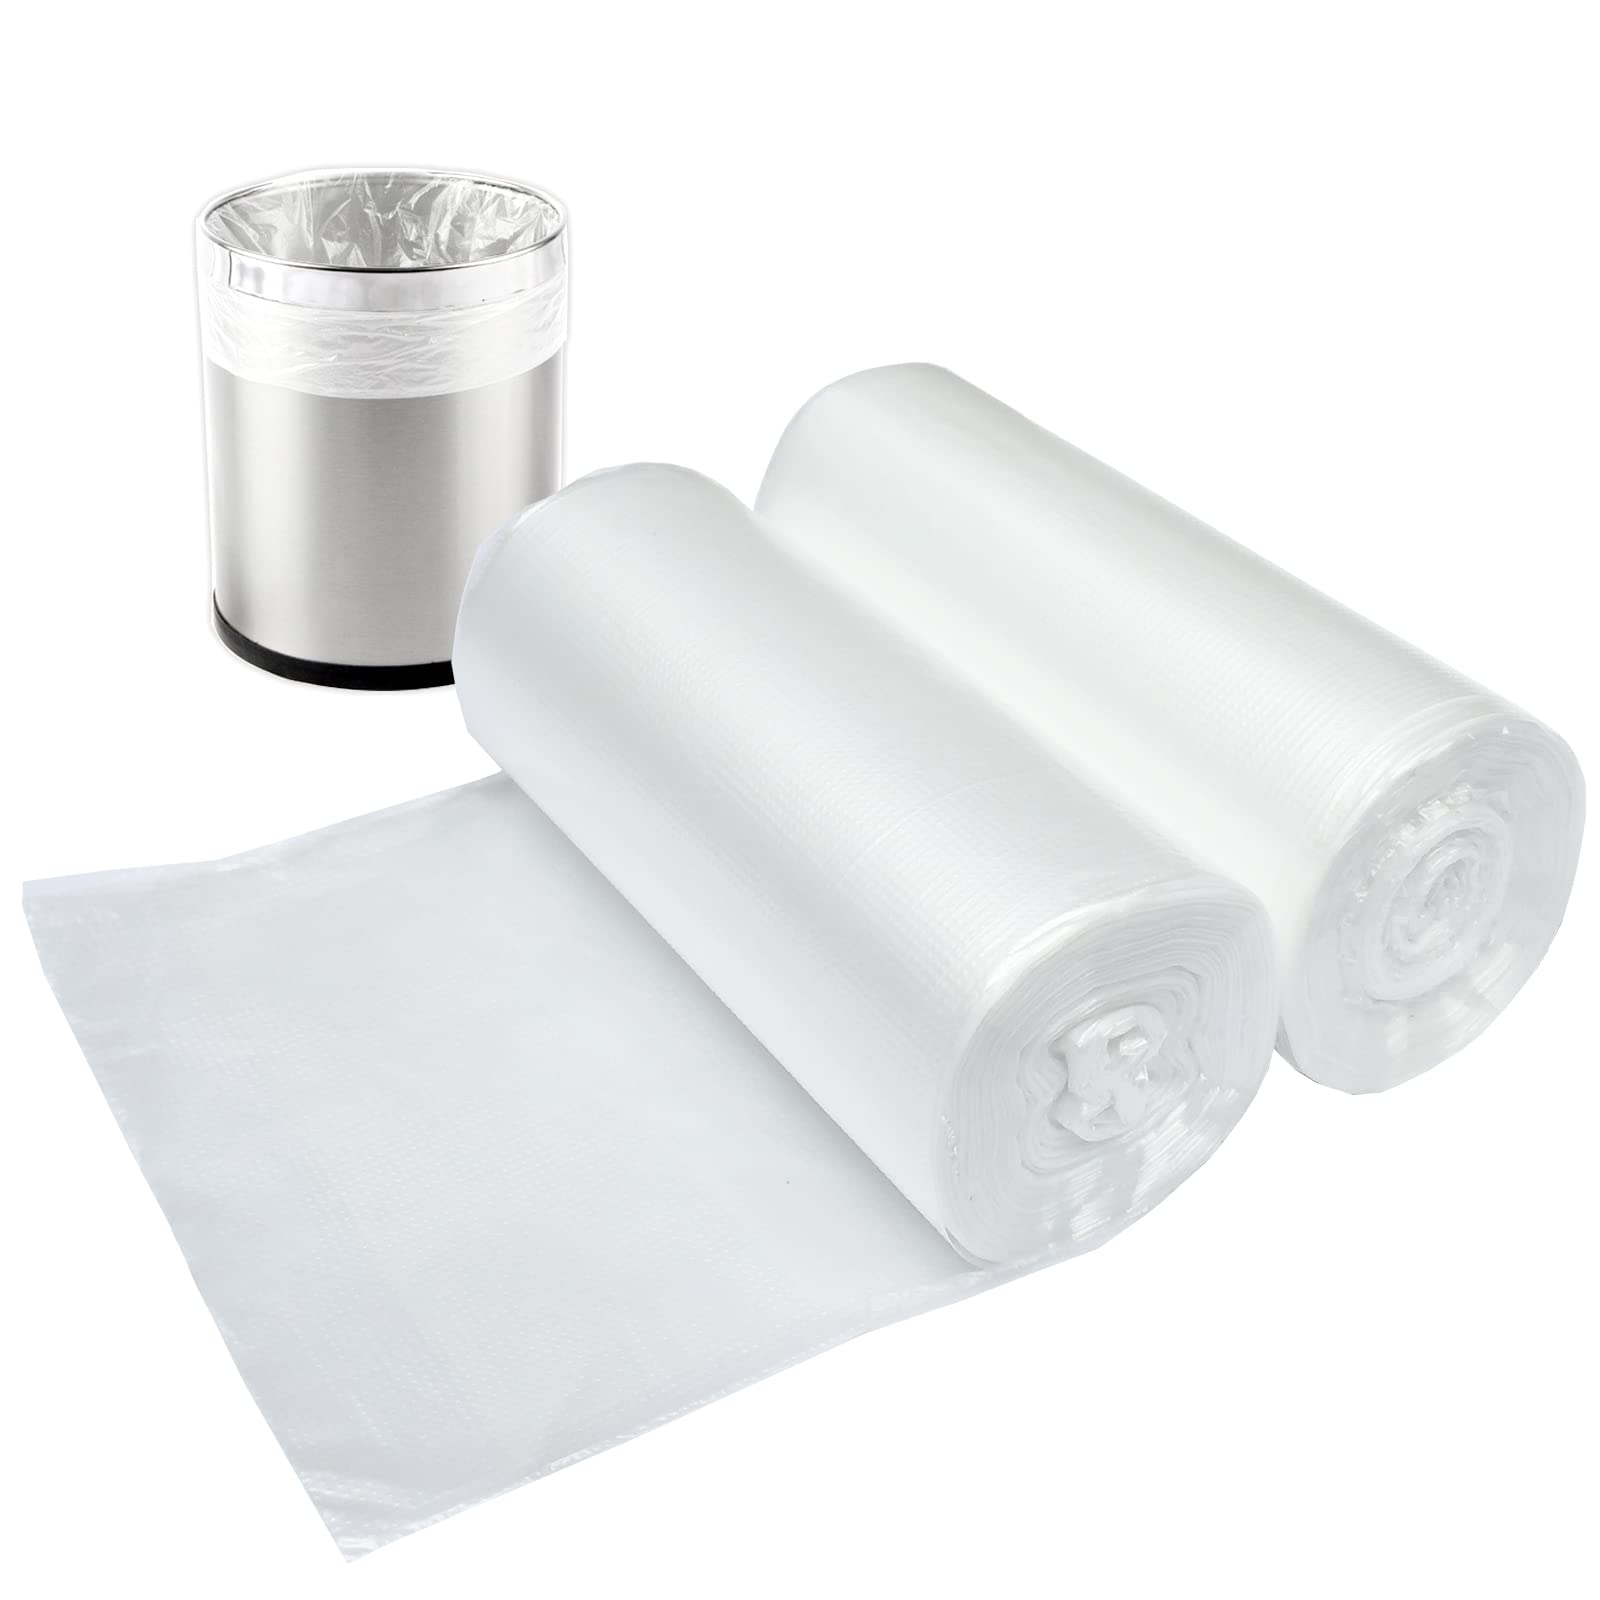 Small Garbage Bags Bin Liners Wastebasket Bags for Home Office